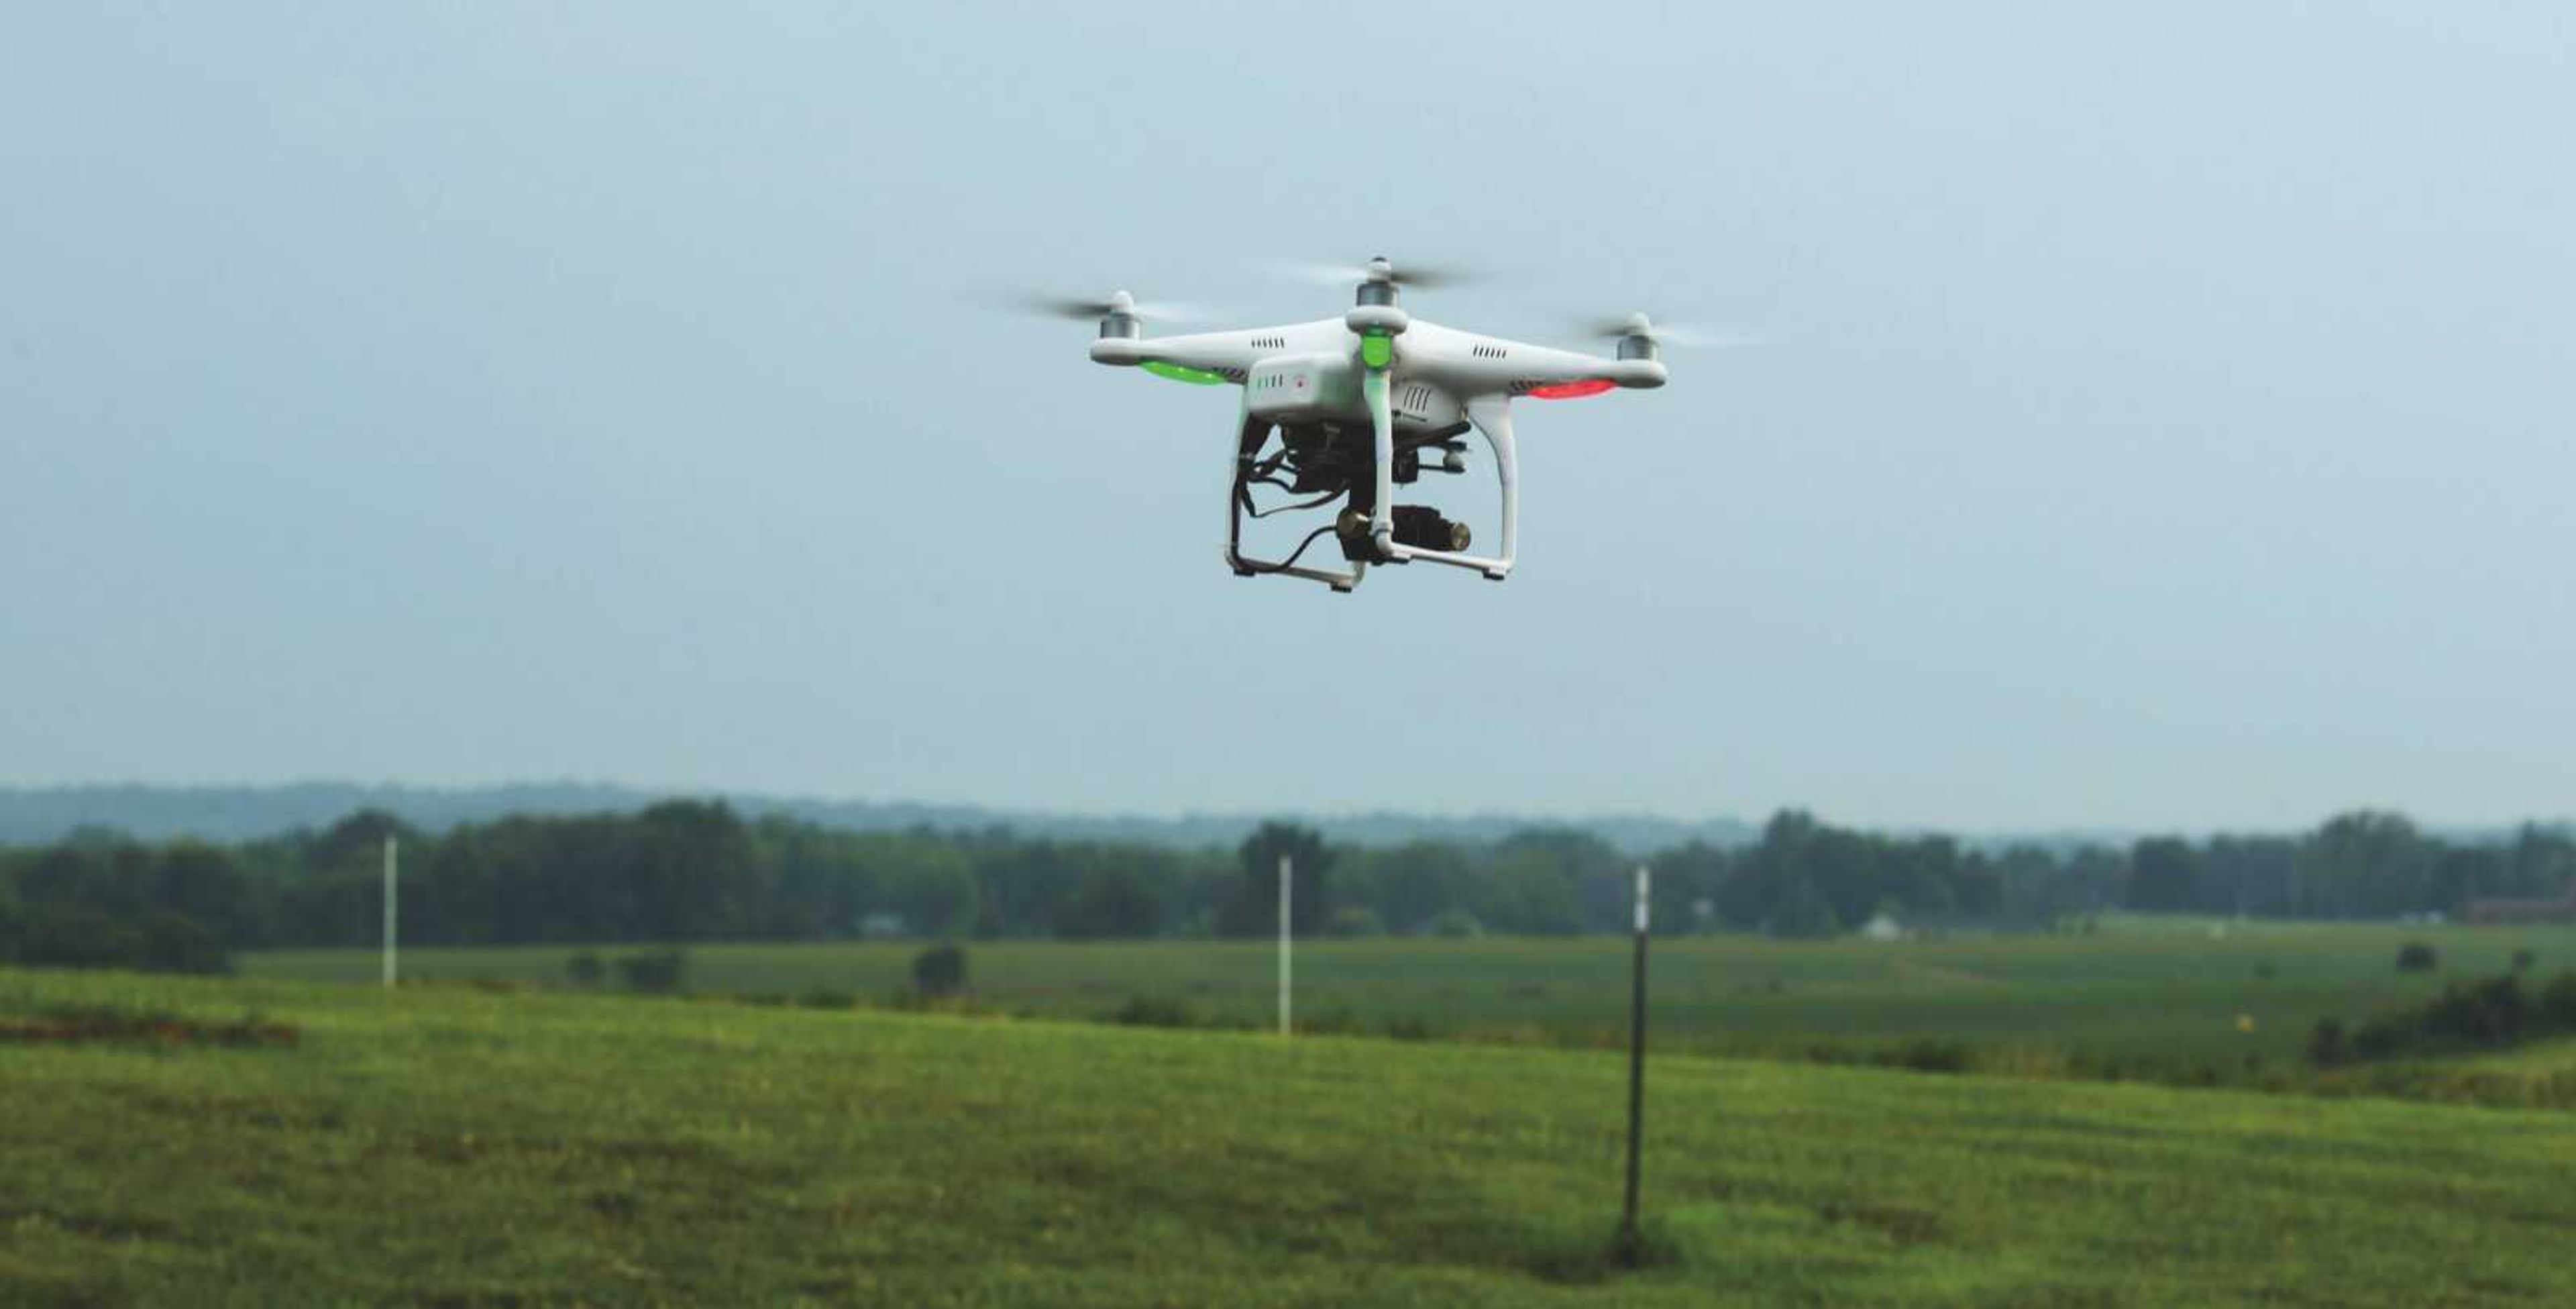 Southeast Missouri State University plans to expand its use of drones by creating a new degree program. Drones have already been used at the Barton Agriculture Research Center.